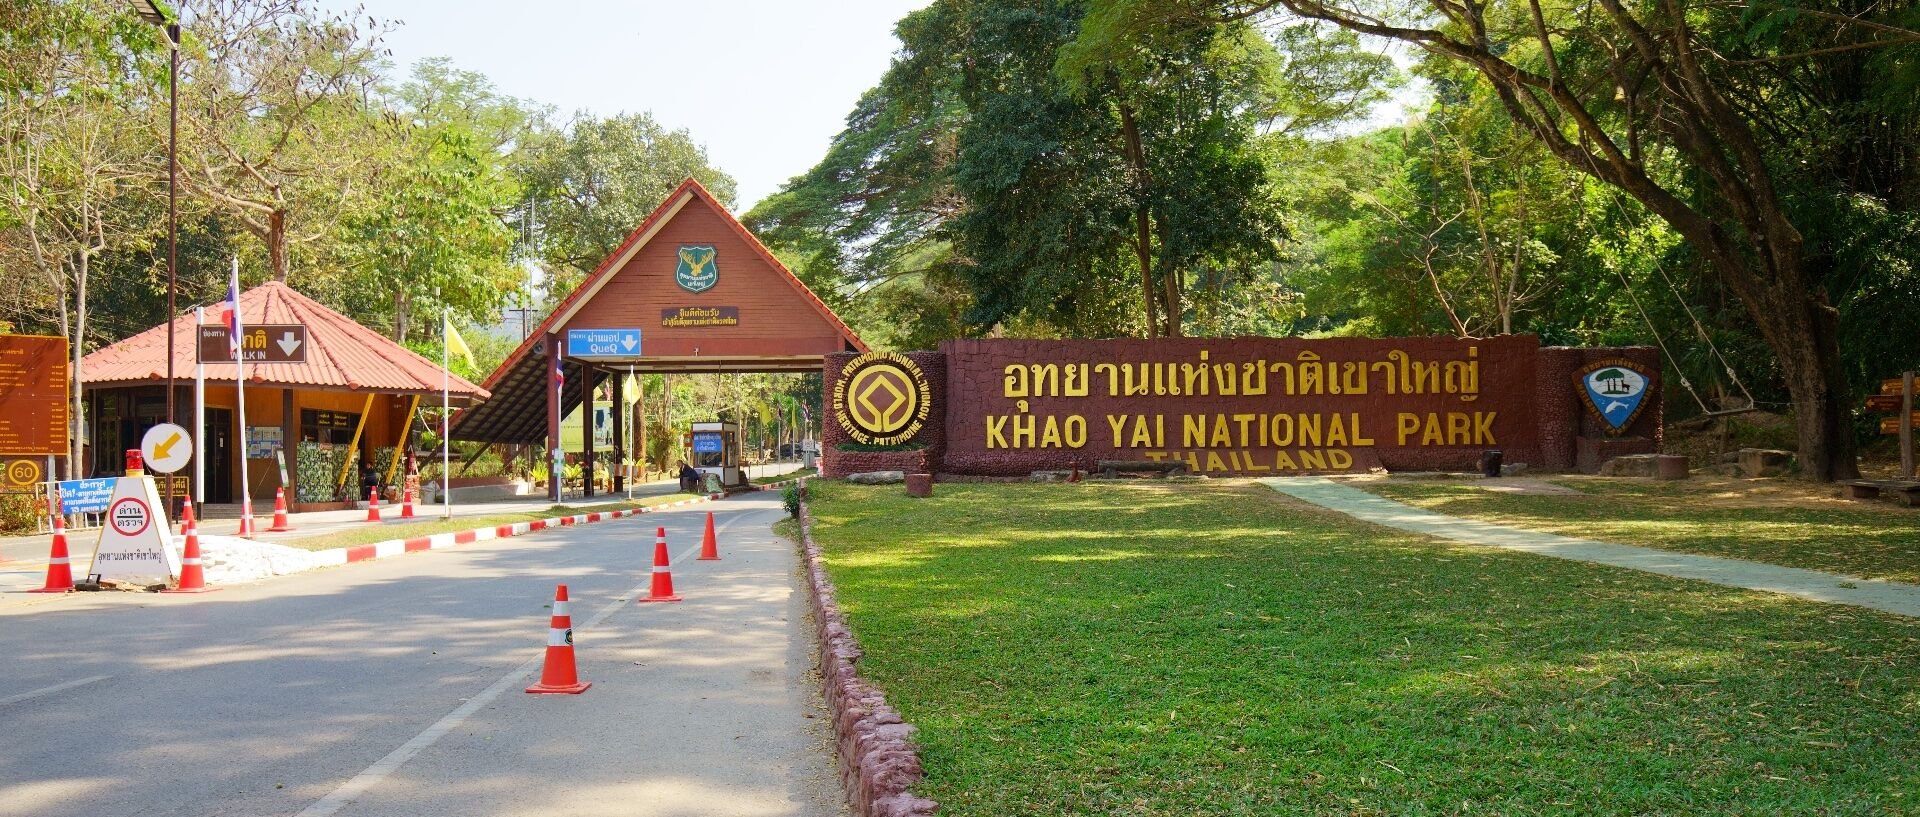 Heavy flooding forces closures in Khao Yai National Park